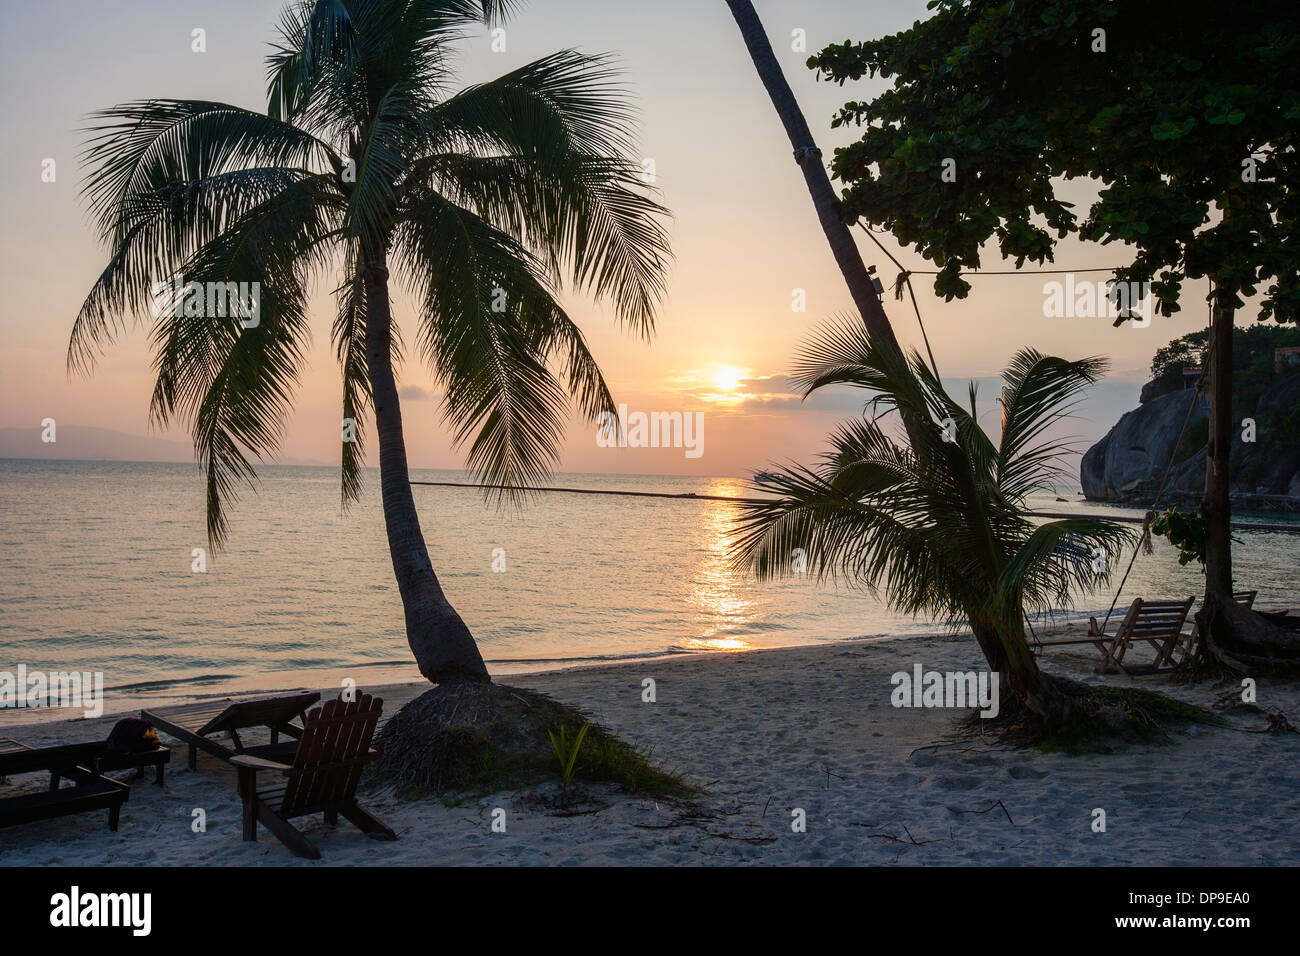 Palm trees and deck chairs on beach at sunset  Koh Pha Ngan  Thailand Stock Photo